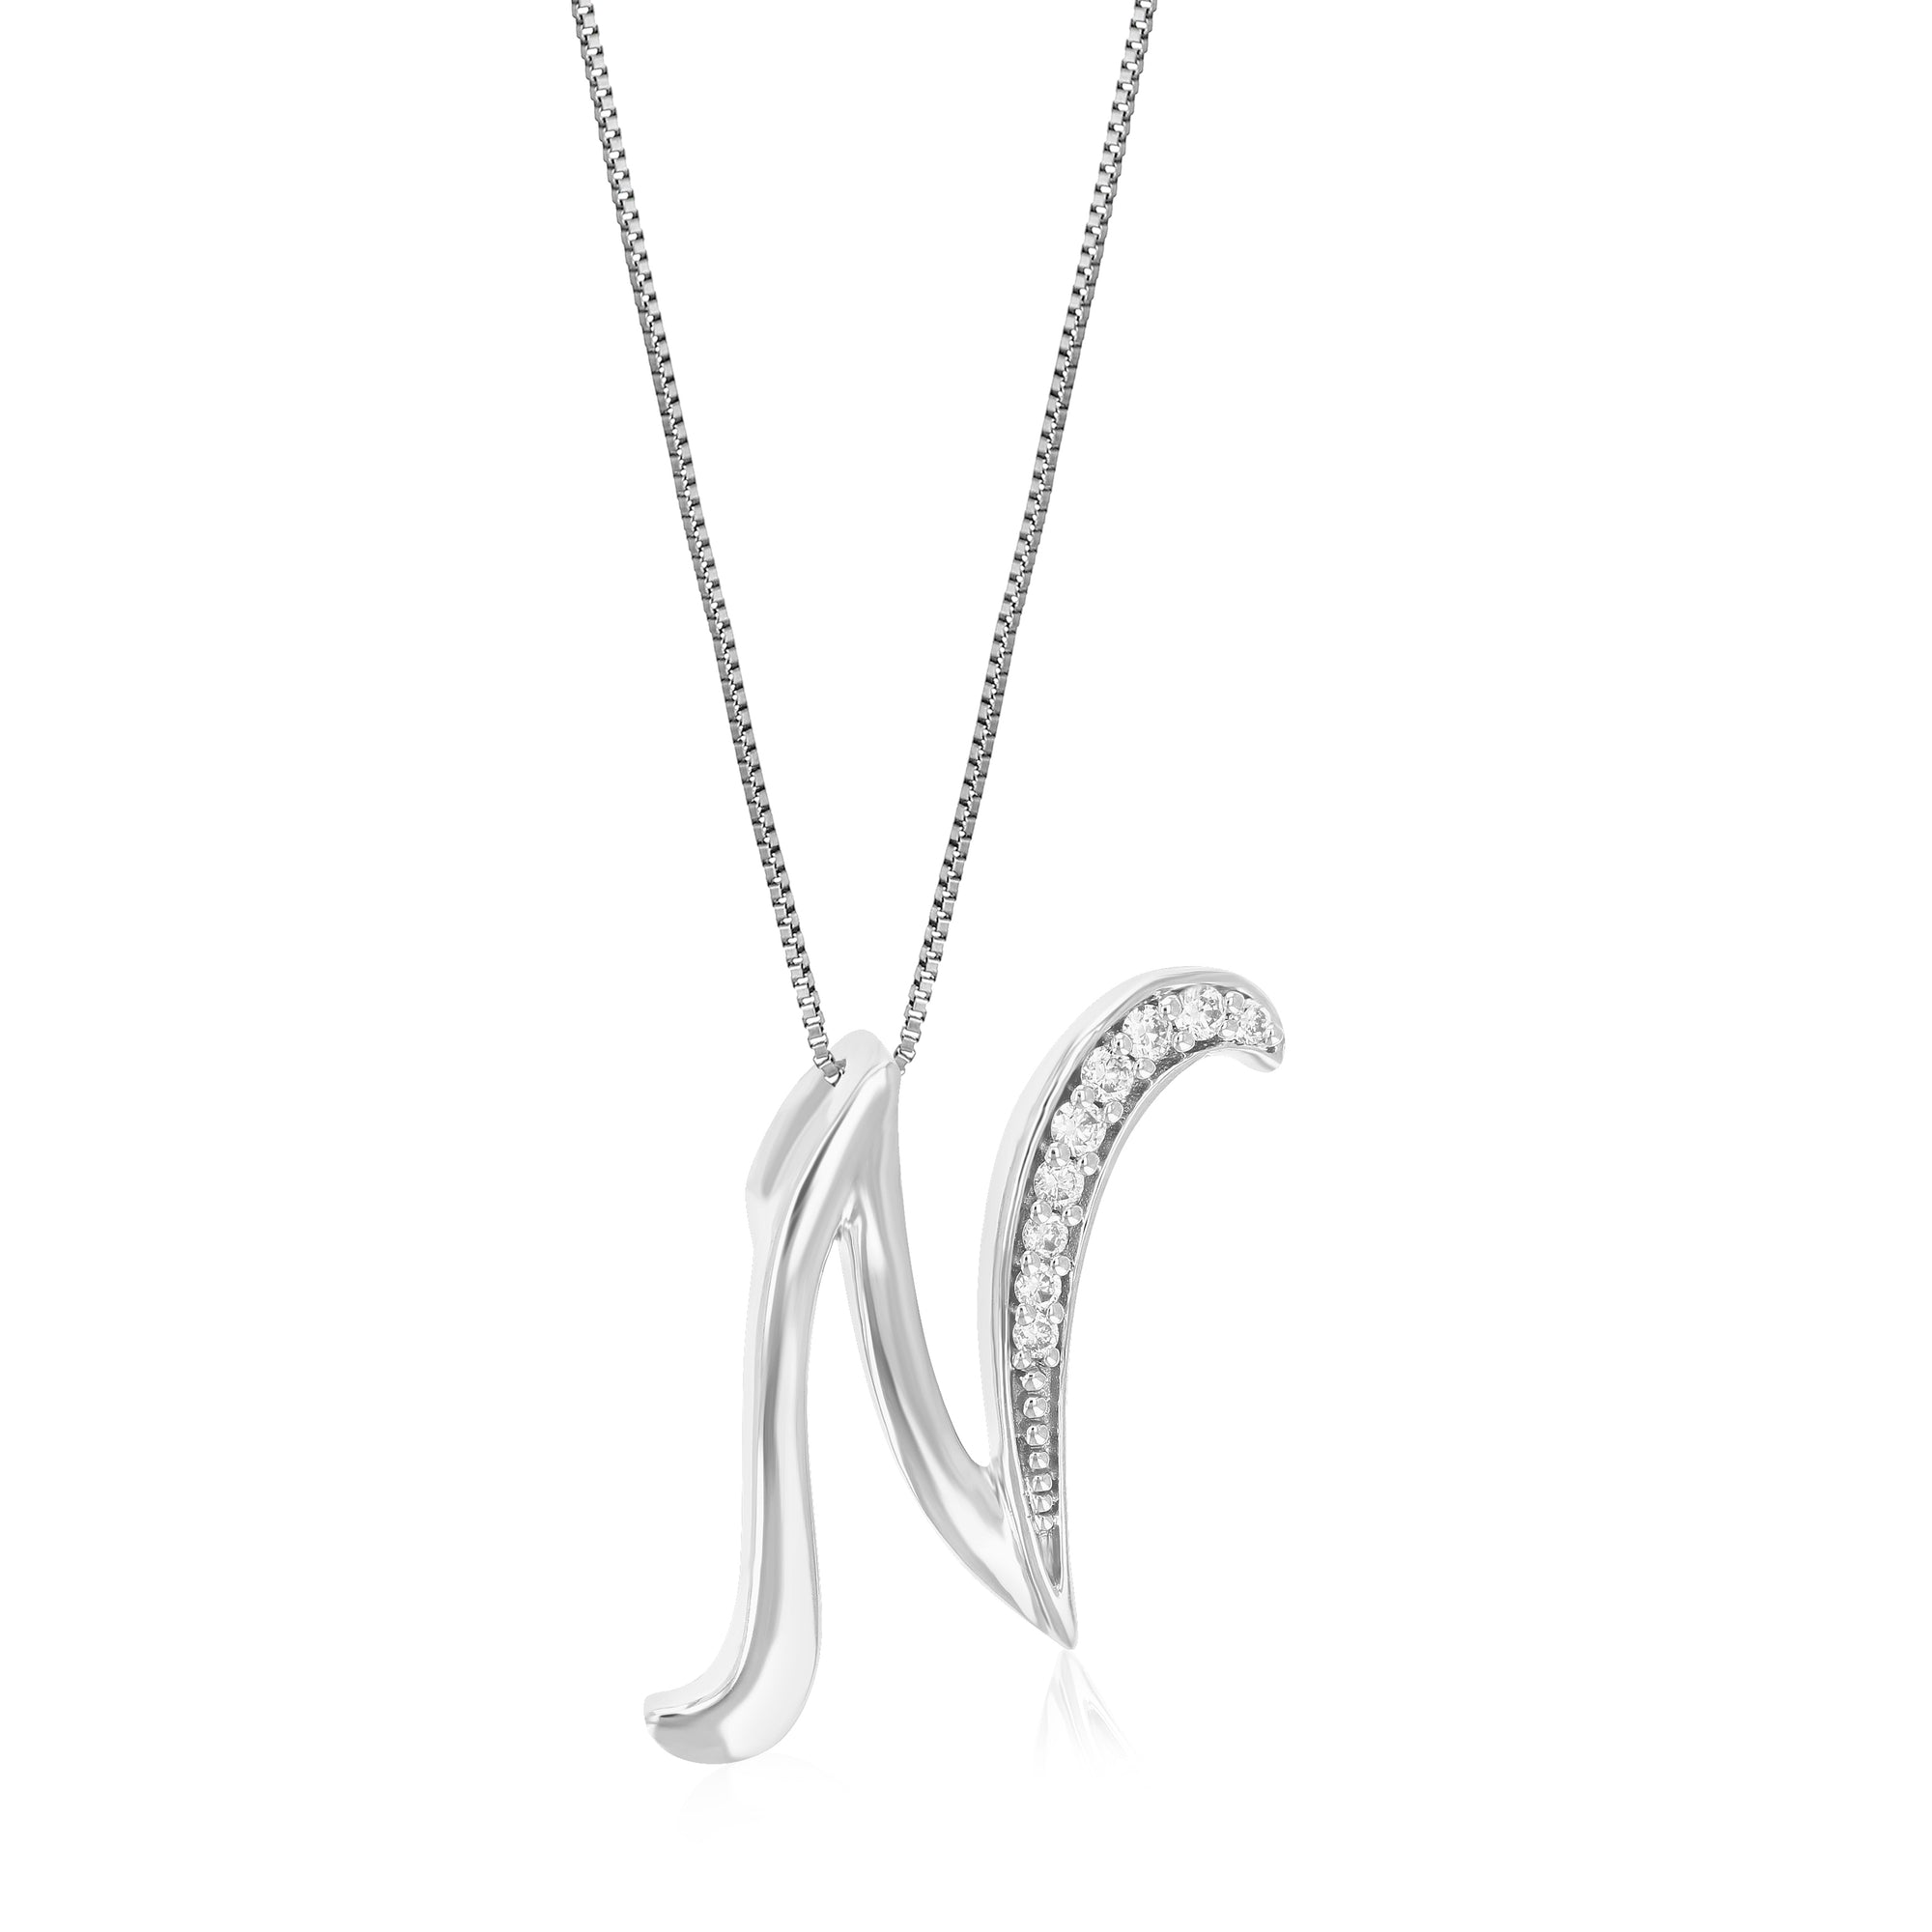 1/12 cttw Diamond Pendant Necklace for Women, Lab Grown Diamond Letter N Pendant Necklace in .925 Sterling Silver with Chain, Size 1/2 Inch